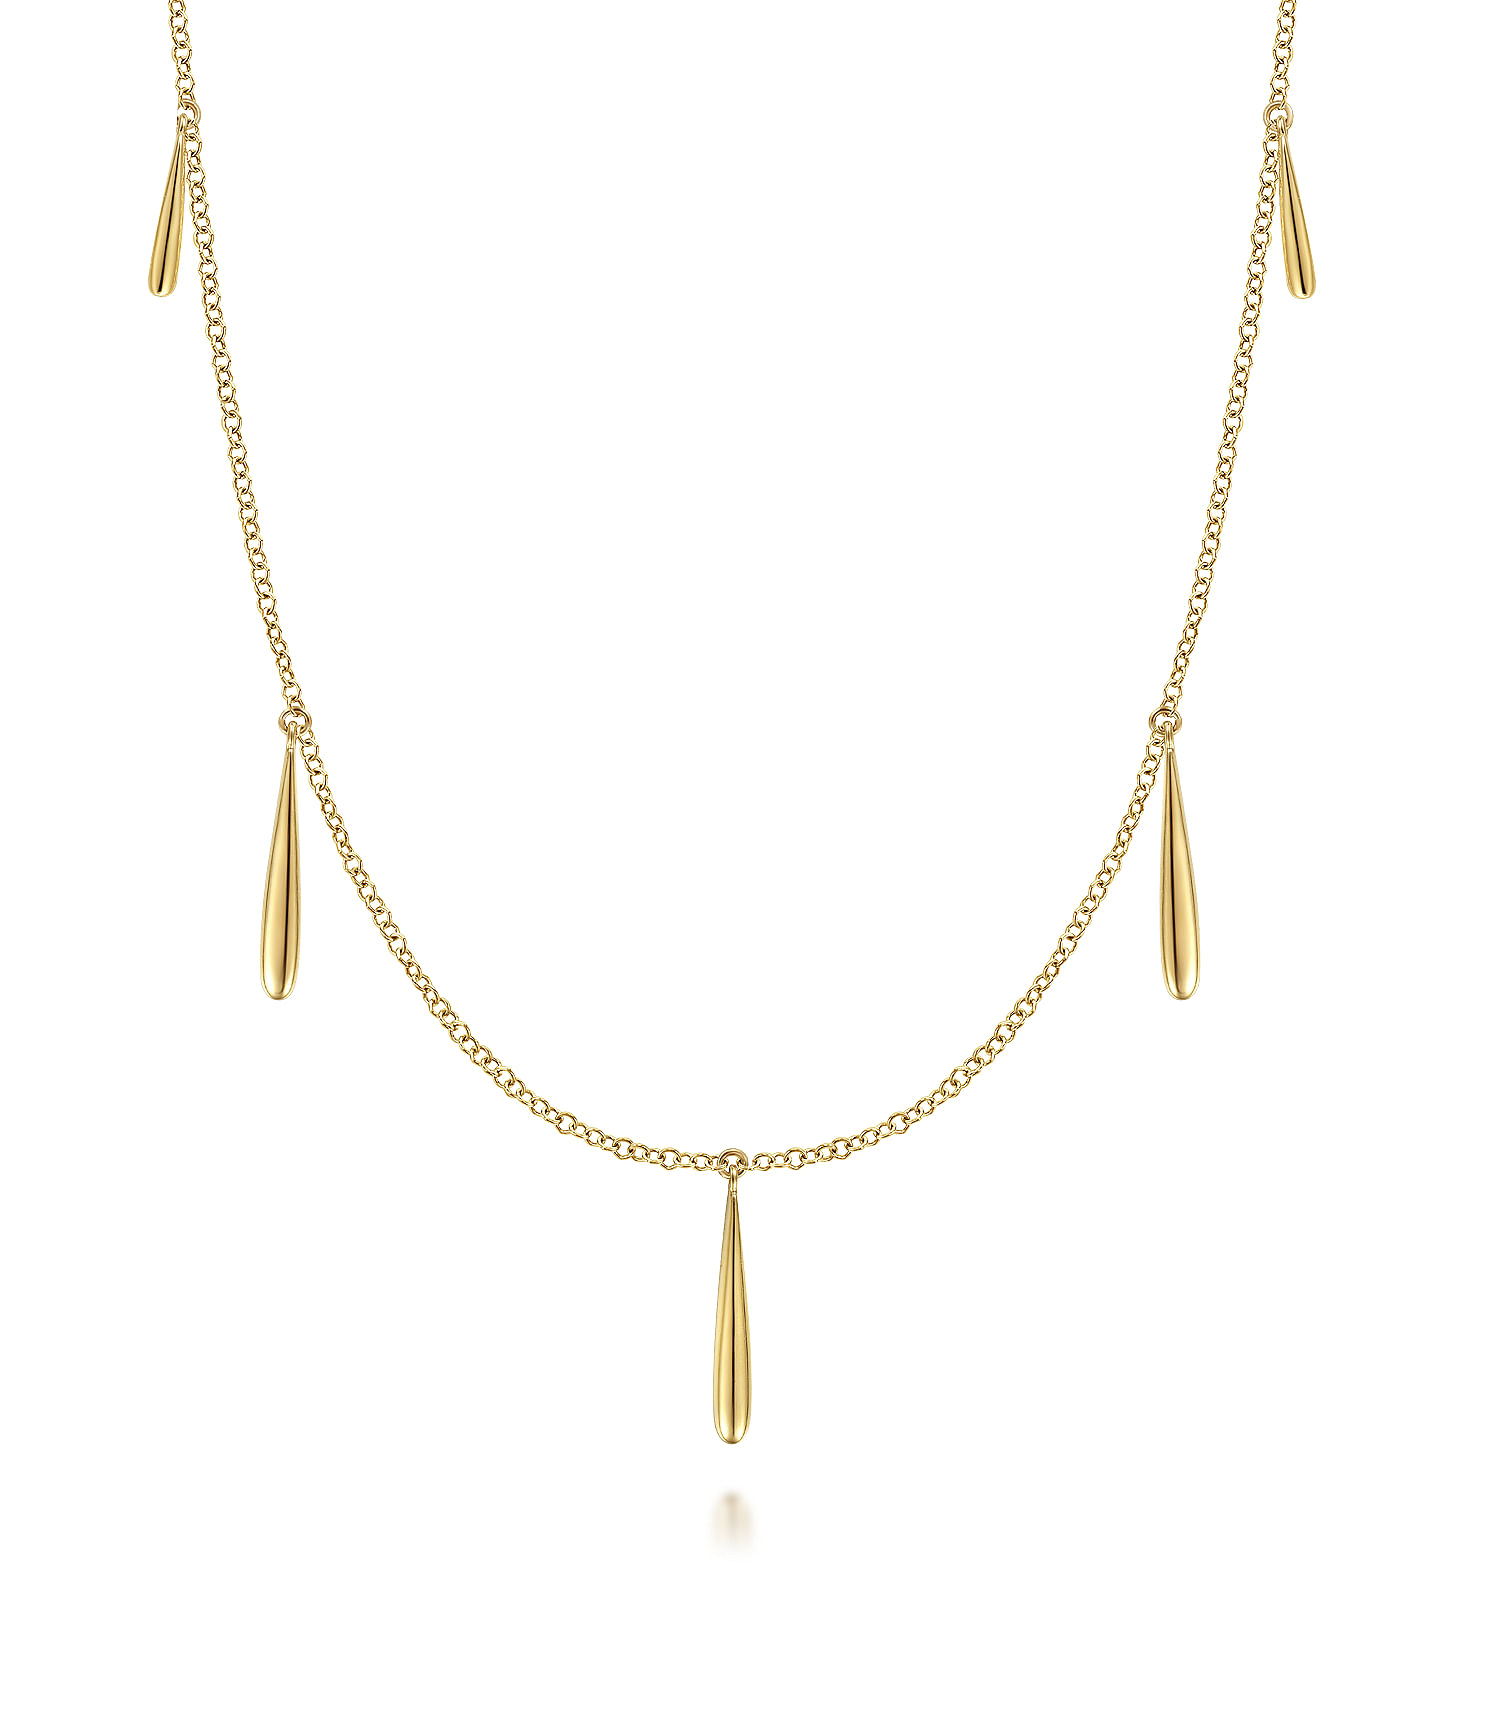 32 inch 14K Yellow Gold 32mm Linear Drops Station Necklace